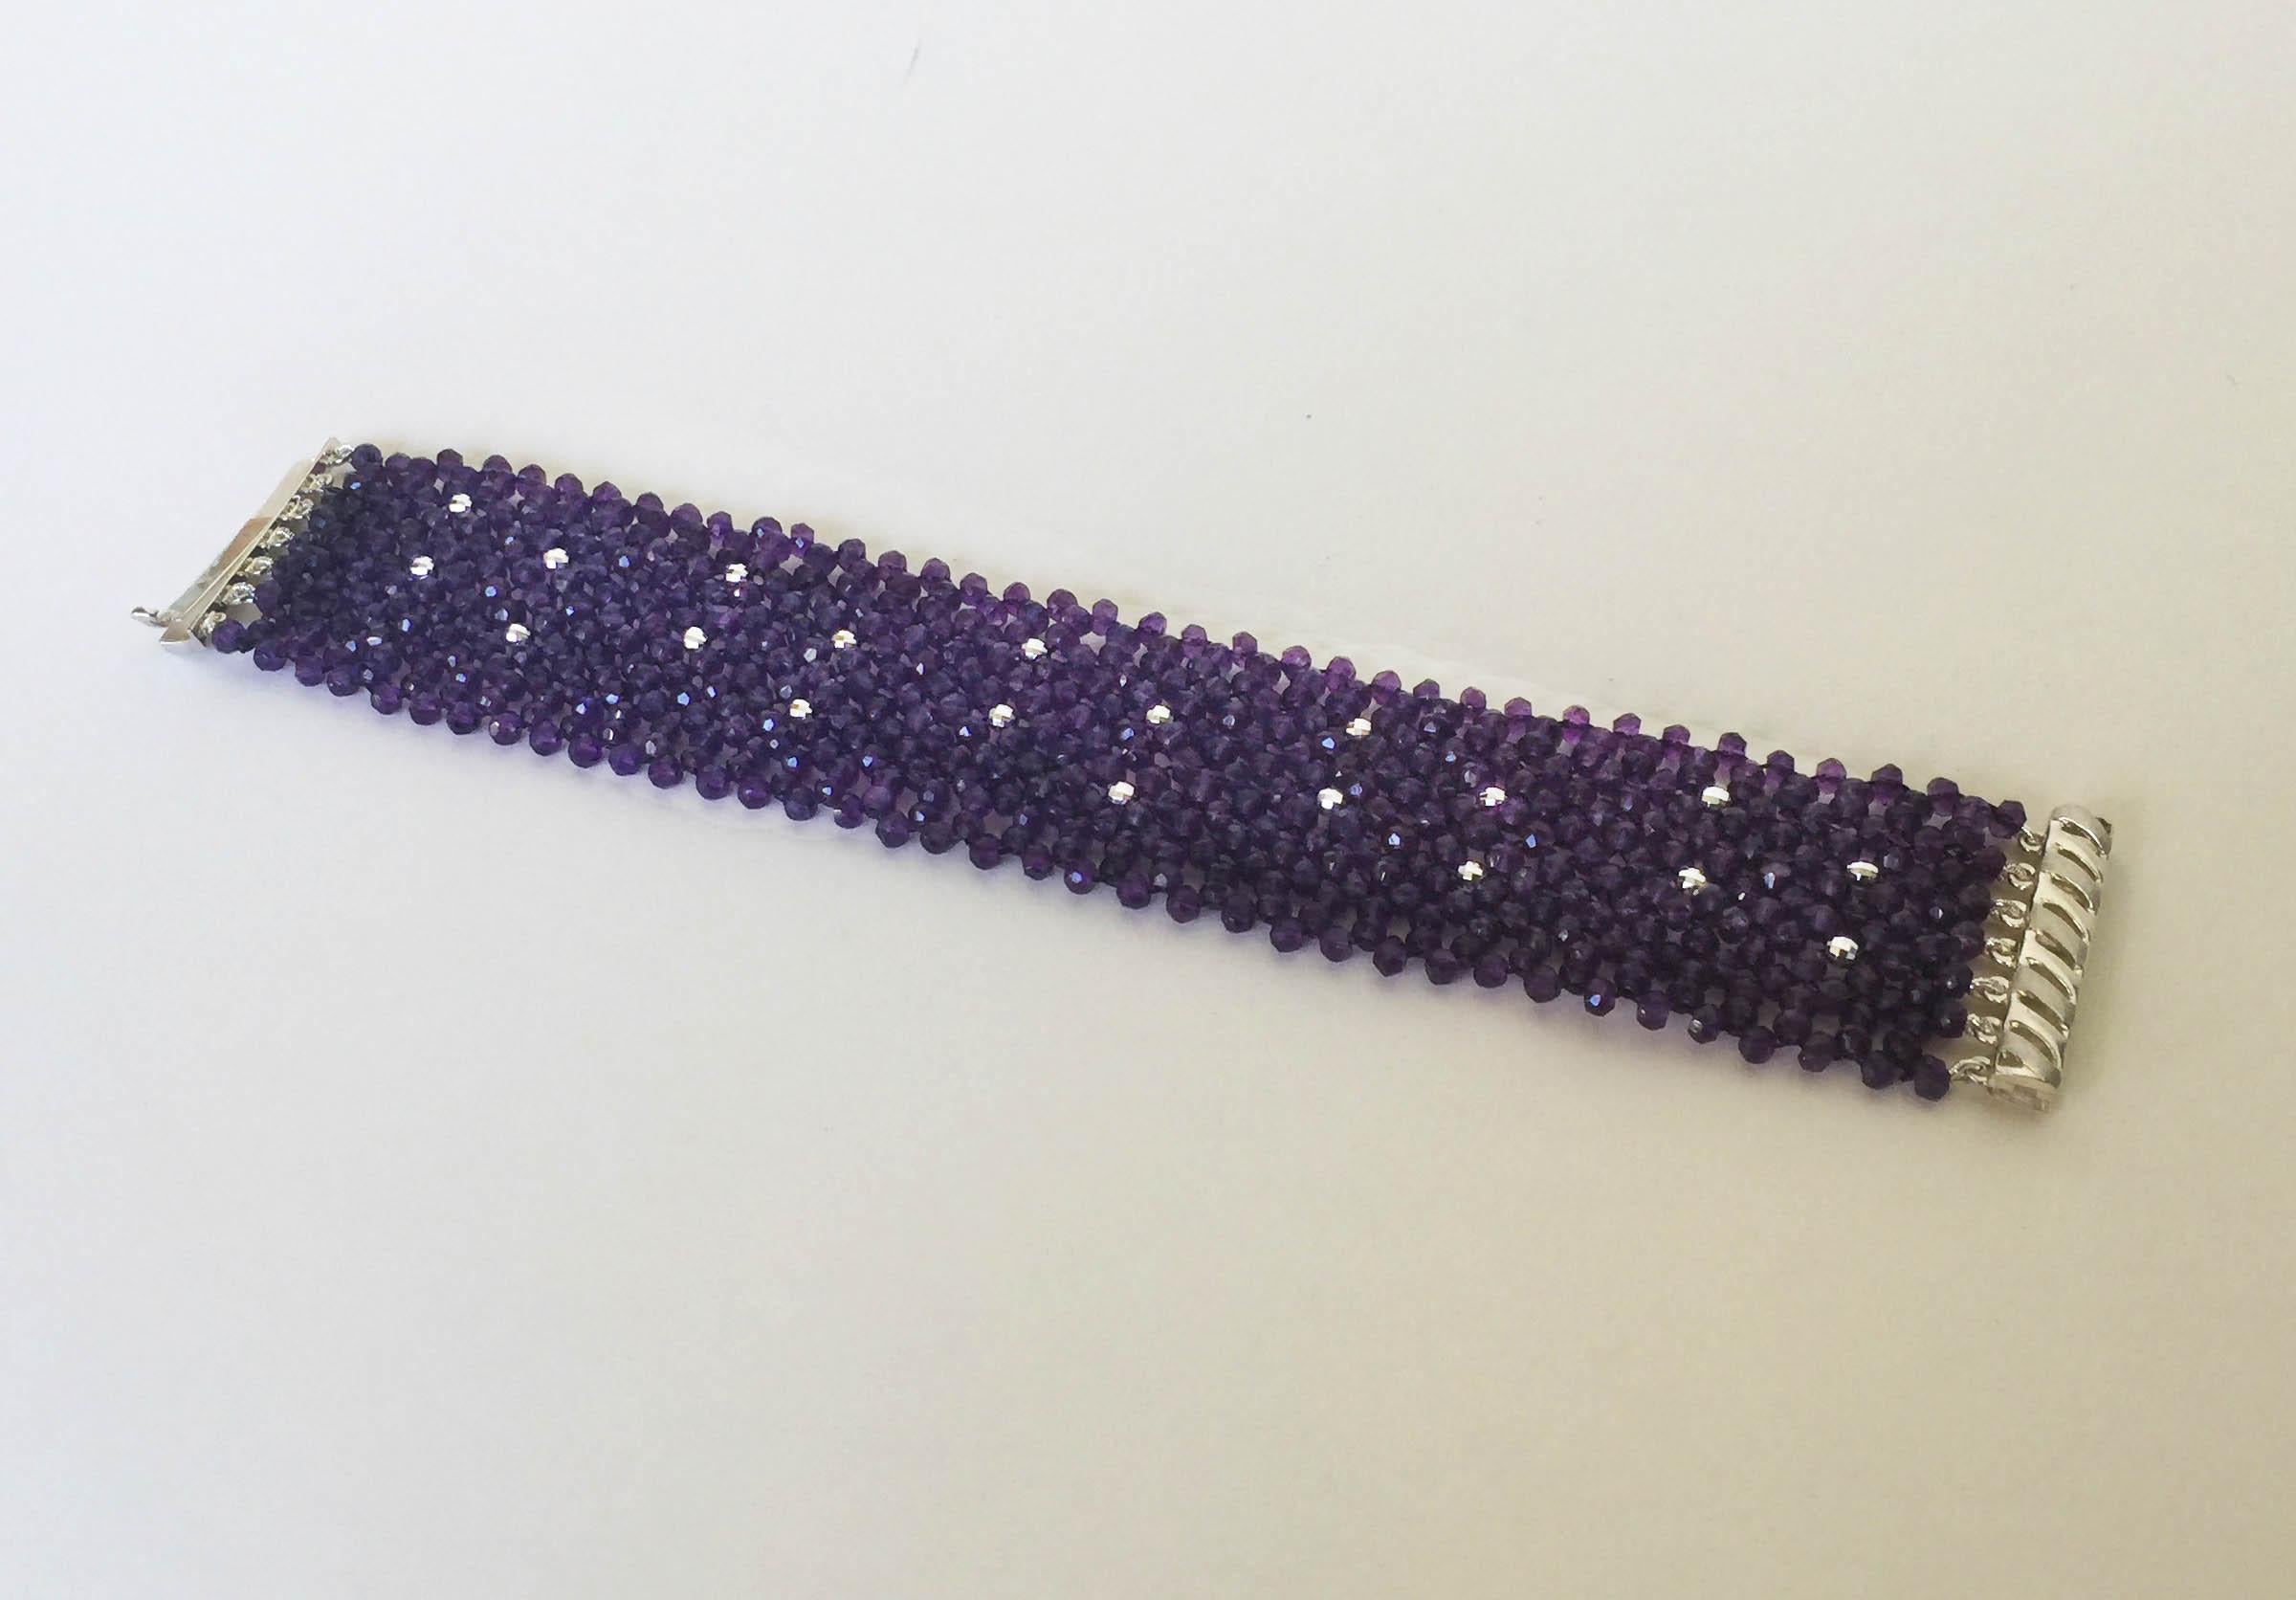 Woven Faceted Amethyst Cuff Bracelet with Sterling Silver Clasp and Beads 1